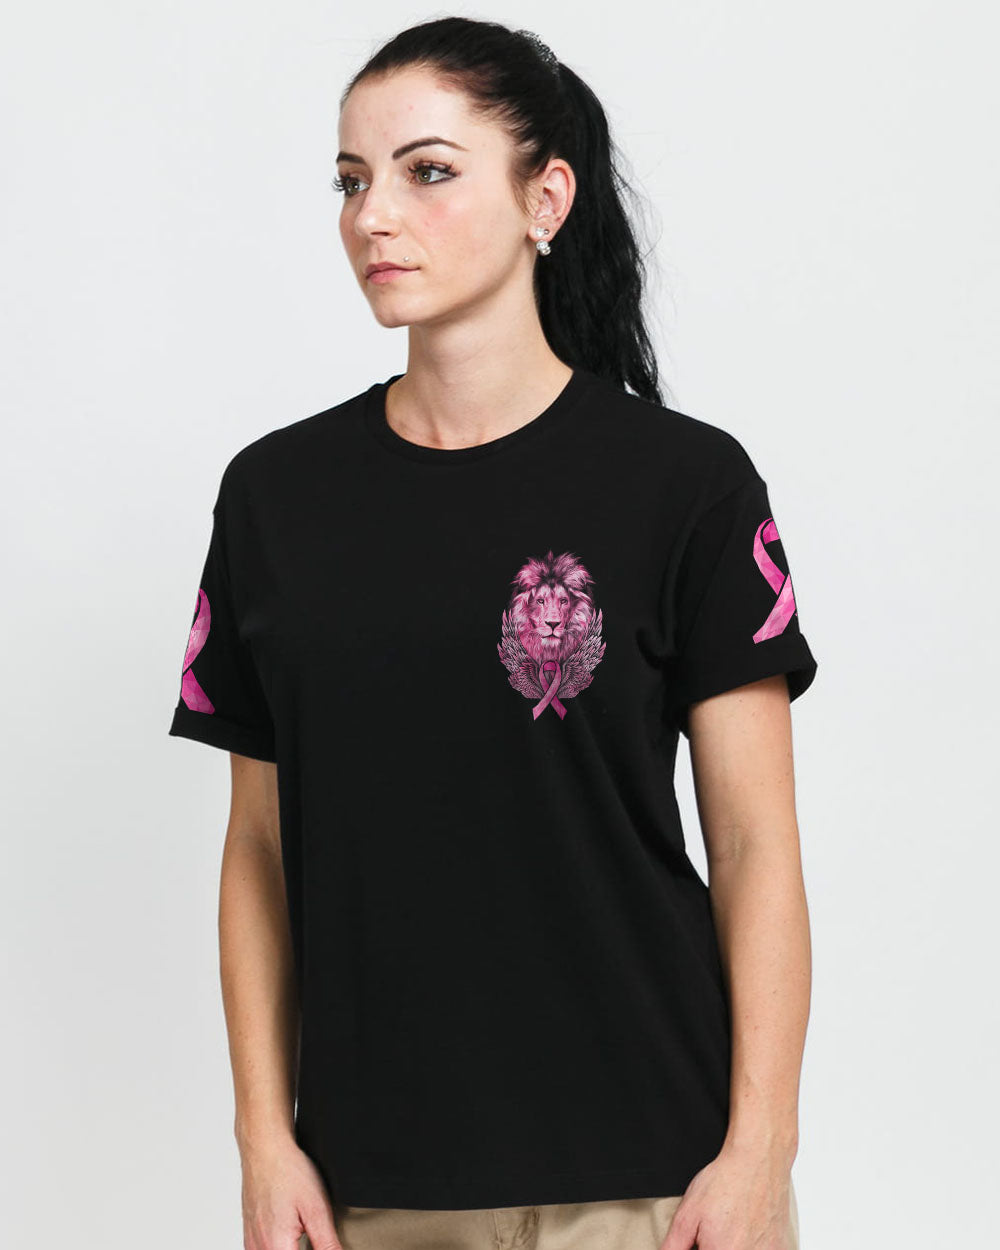 Don't Judge Lion Wings Pink Ribbon Women's Breast Cancer Awareness Tshirt